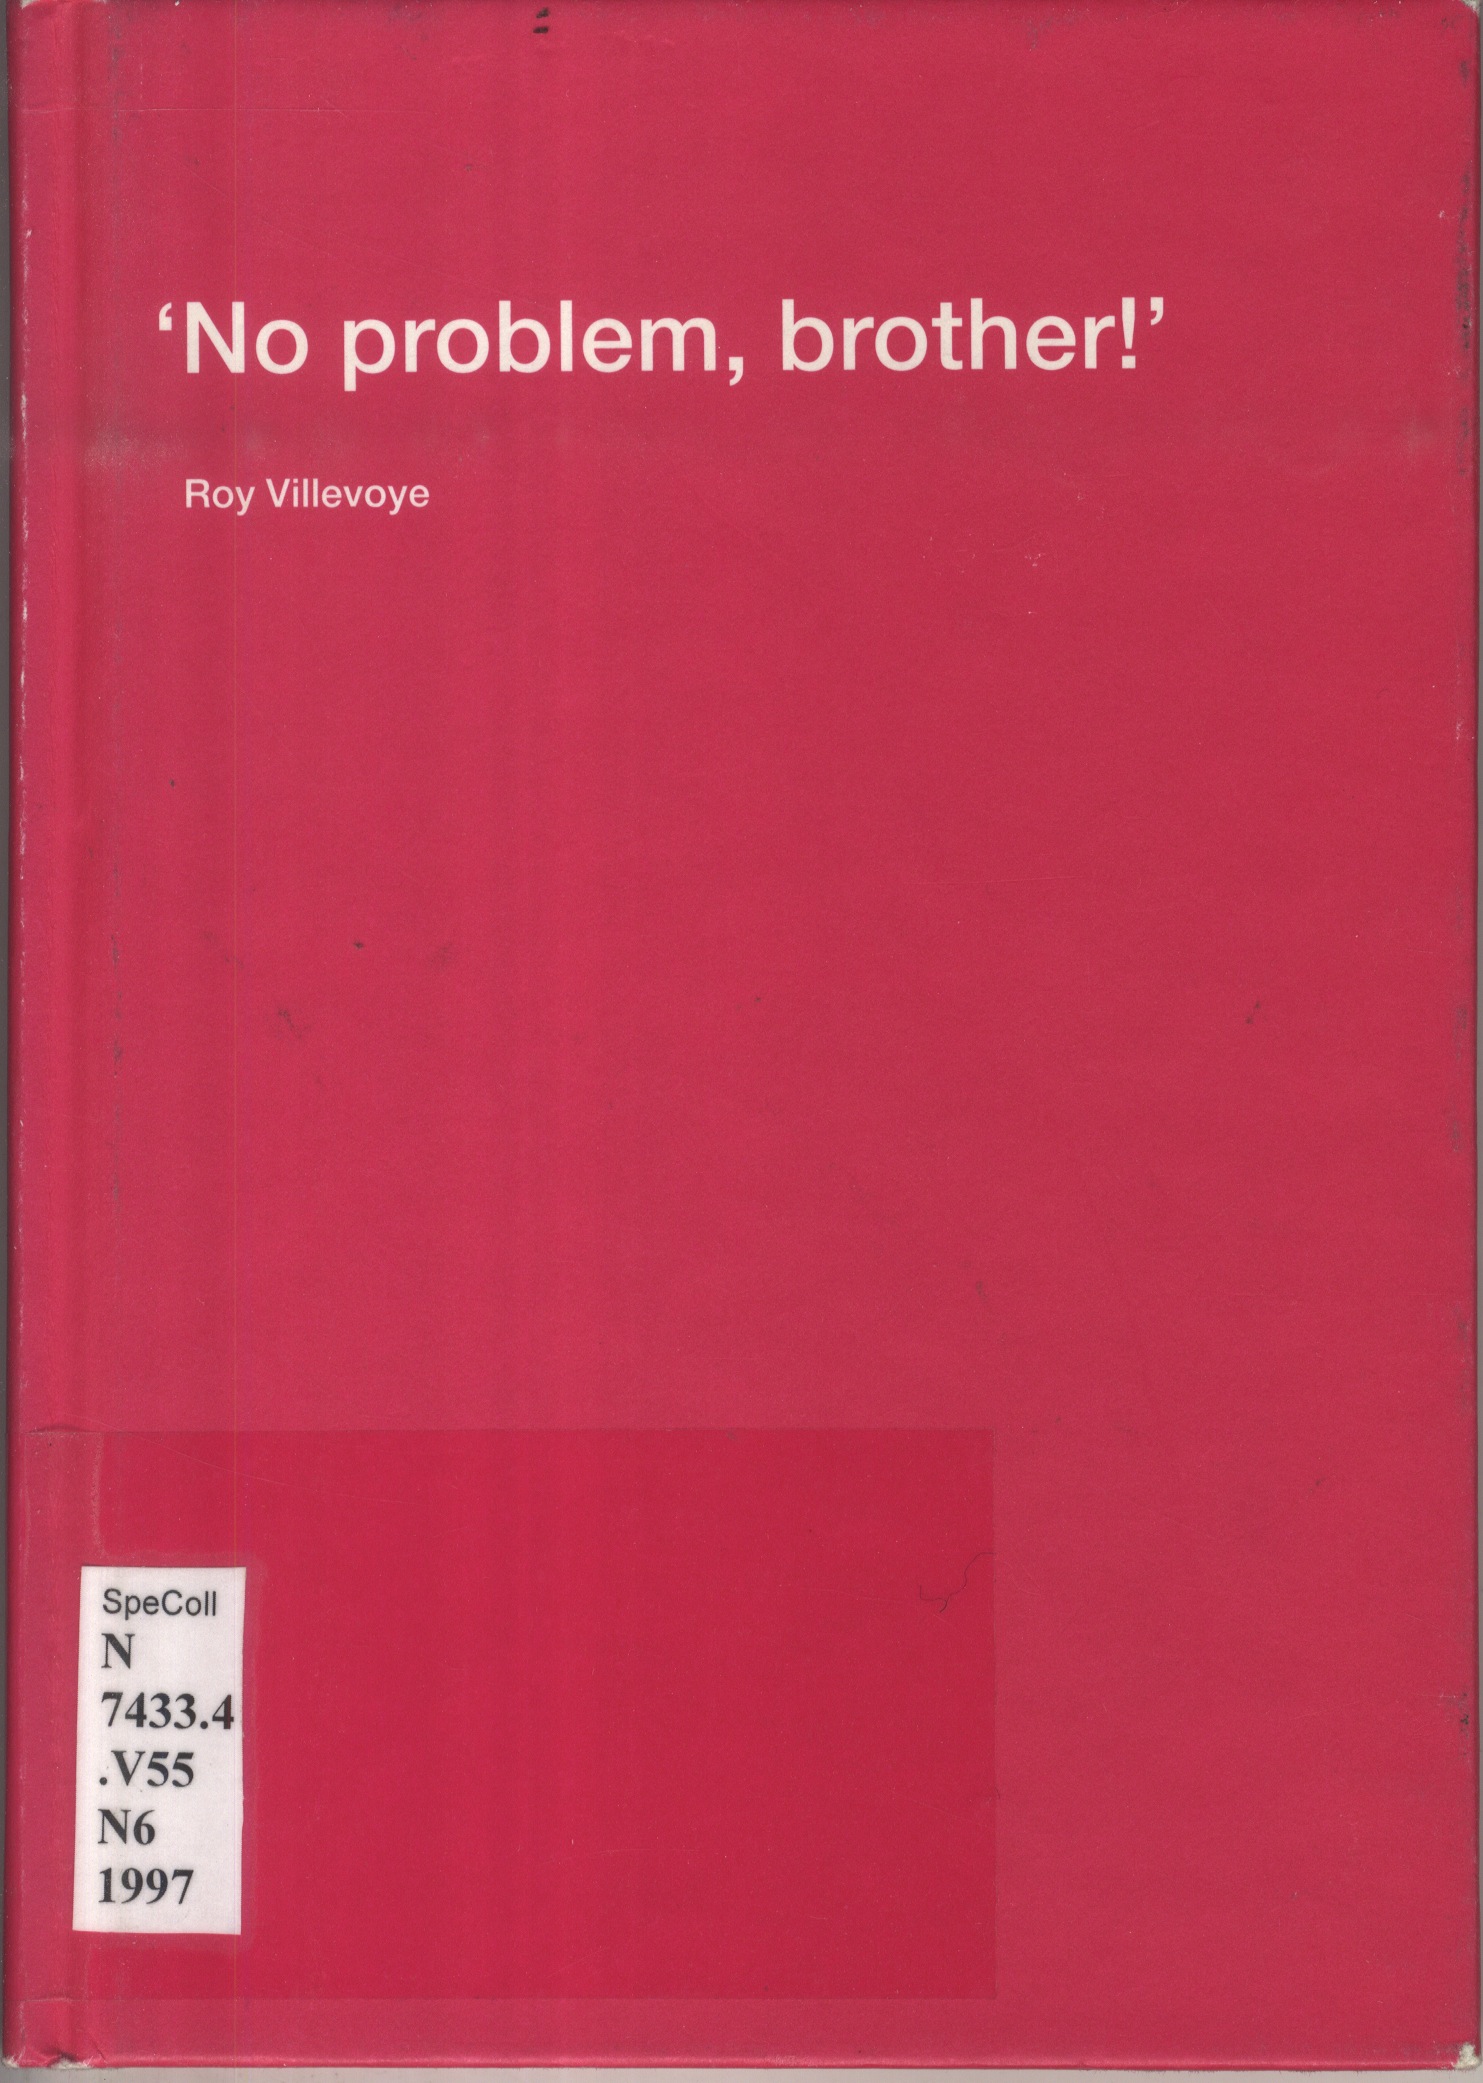 red book cover with title in top left corner